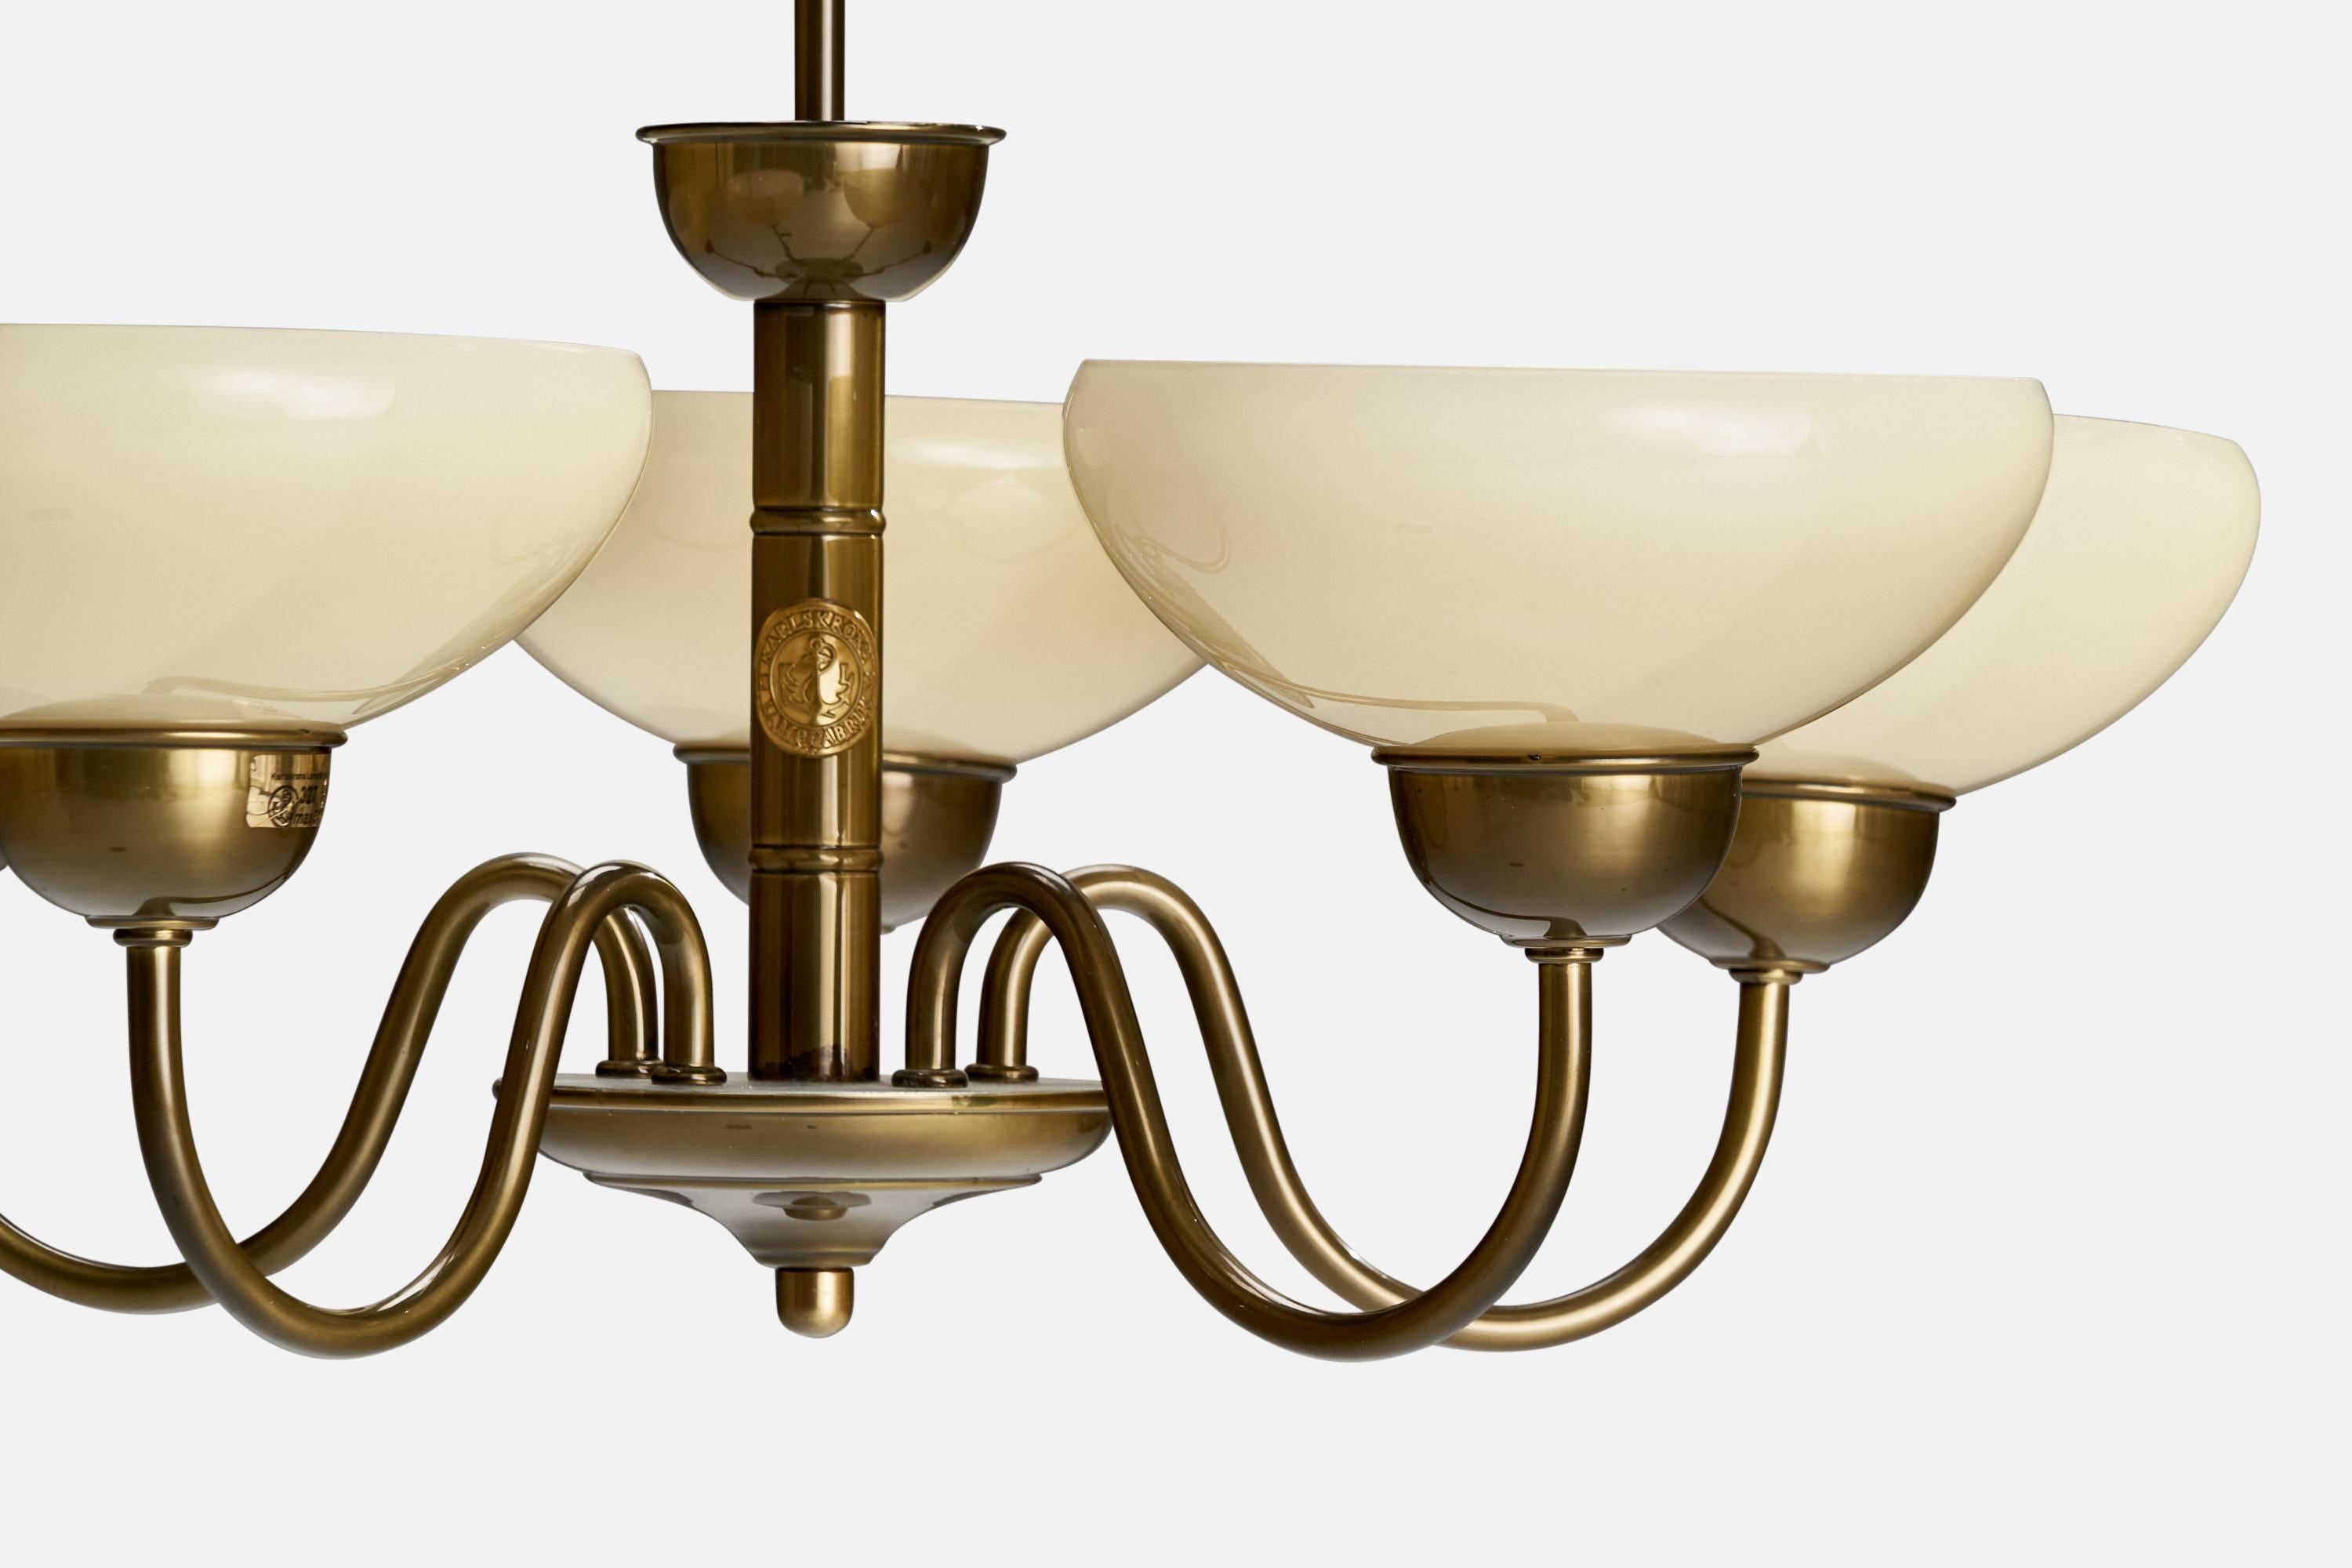 Karlskrona Lampfabrik, Chandelier, Brass, Glass, Sweden, 1970s In Good Condition For Sale In High Point, NC